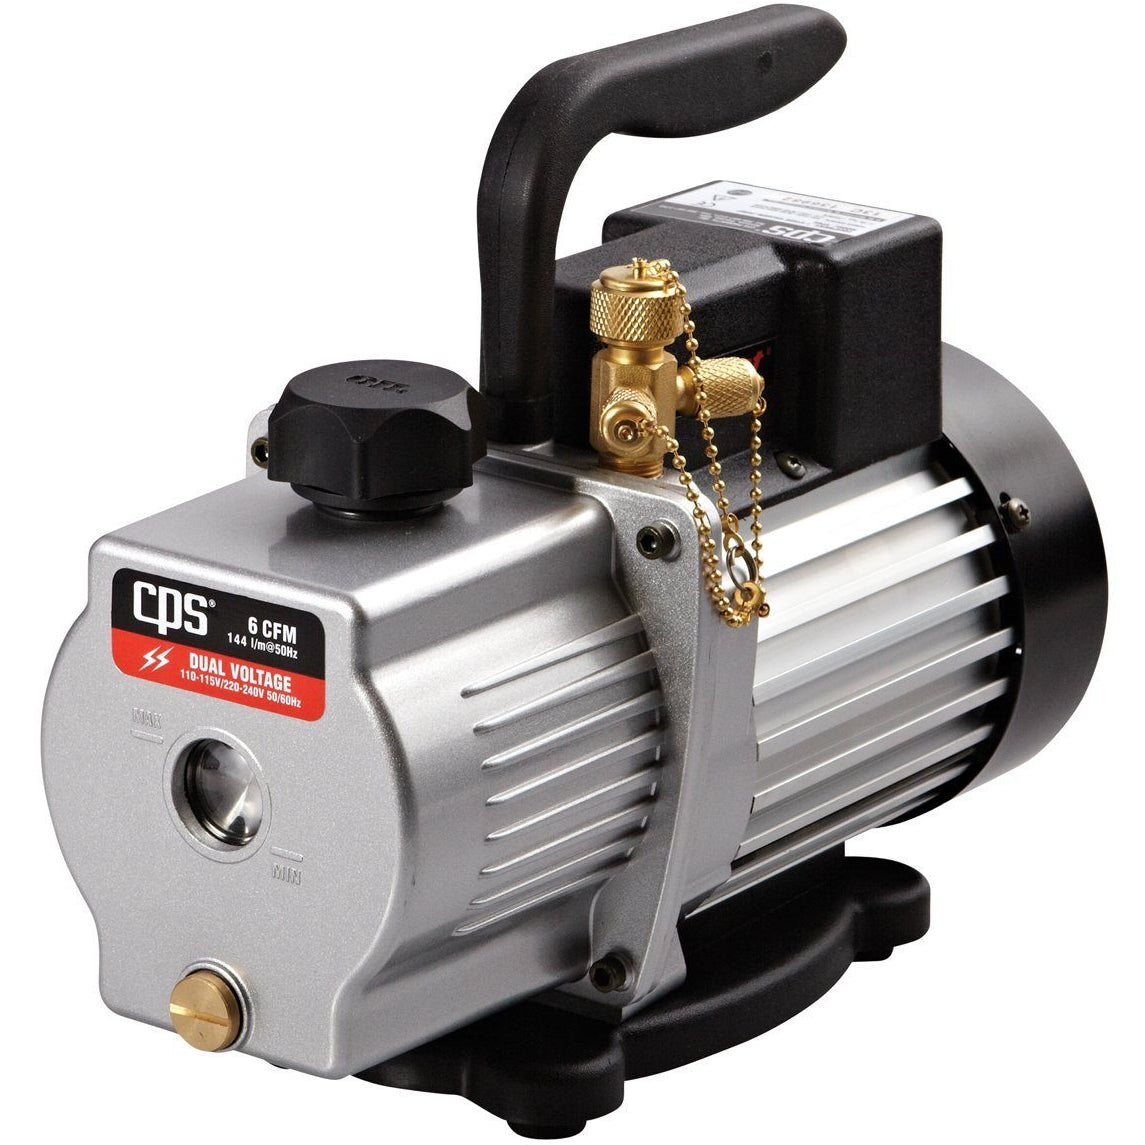 CPS Products, CPS 6CFM Single Stage Vacuum Pump